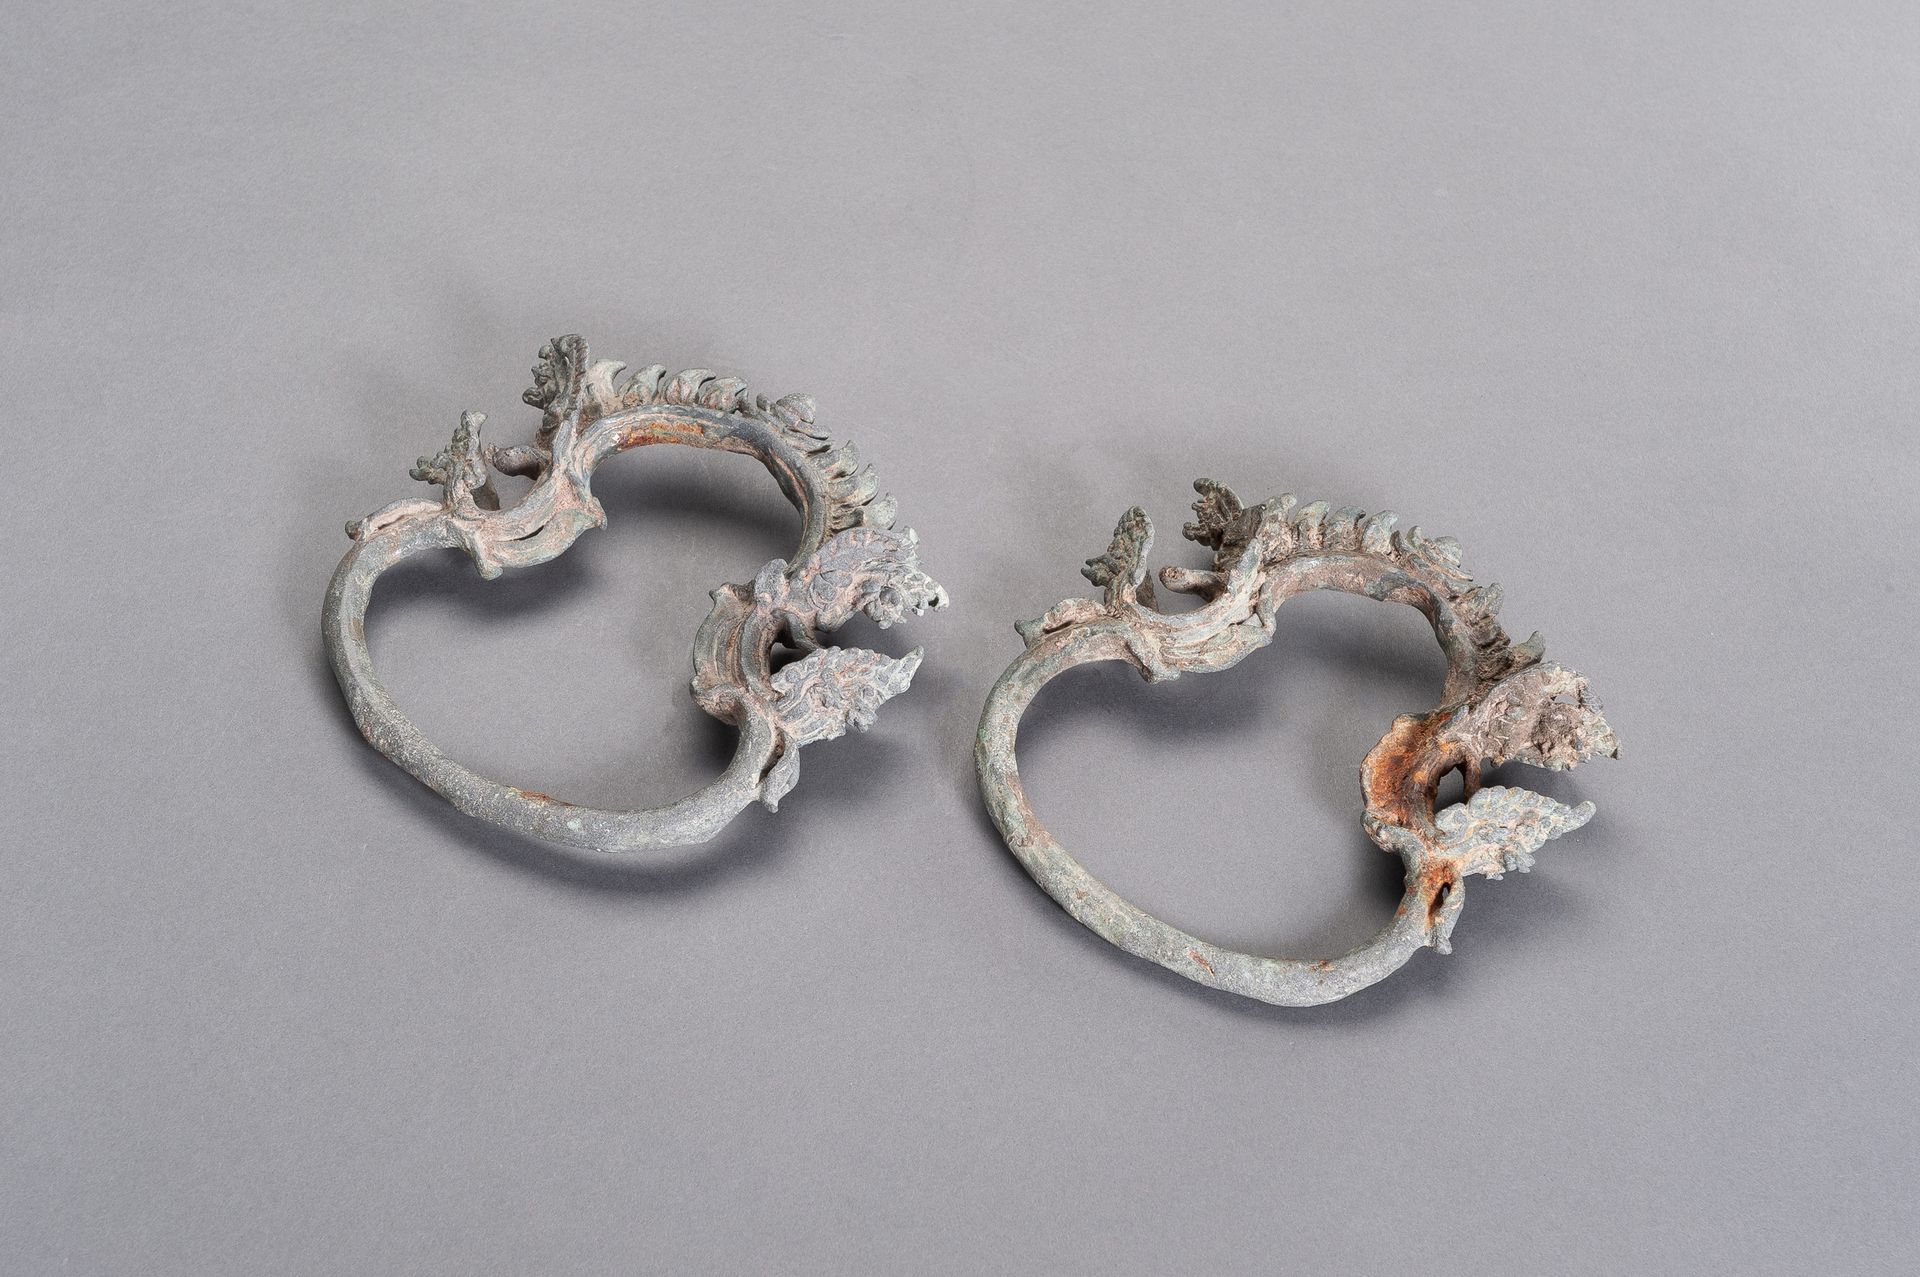 A PAIR OF KHMER BRONZE PALANQUIN RINGS Pärchen PALANQUIN-Ringe aus KHMER-Bronze
&hellip;